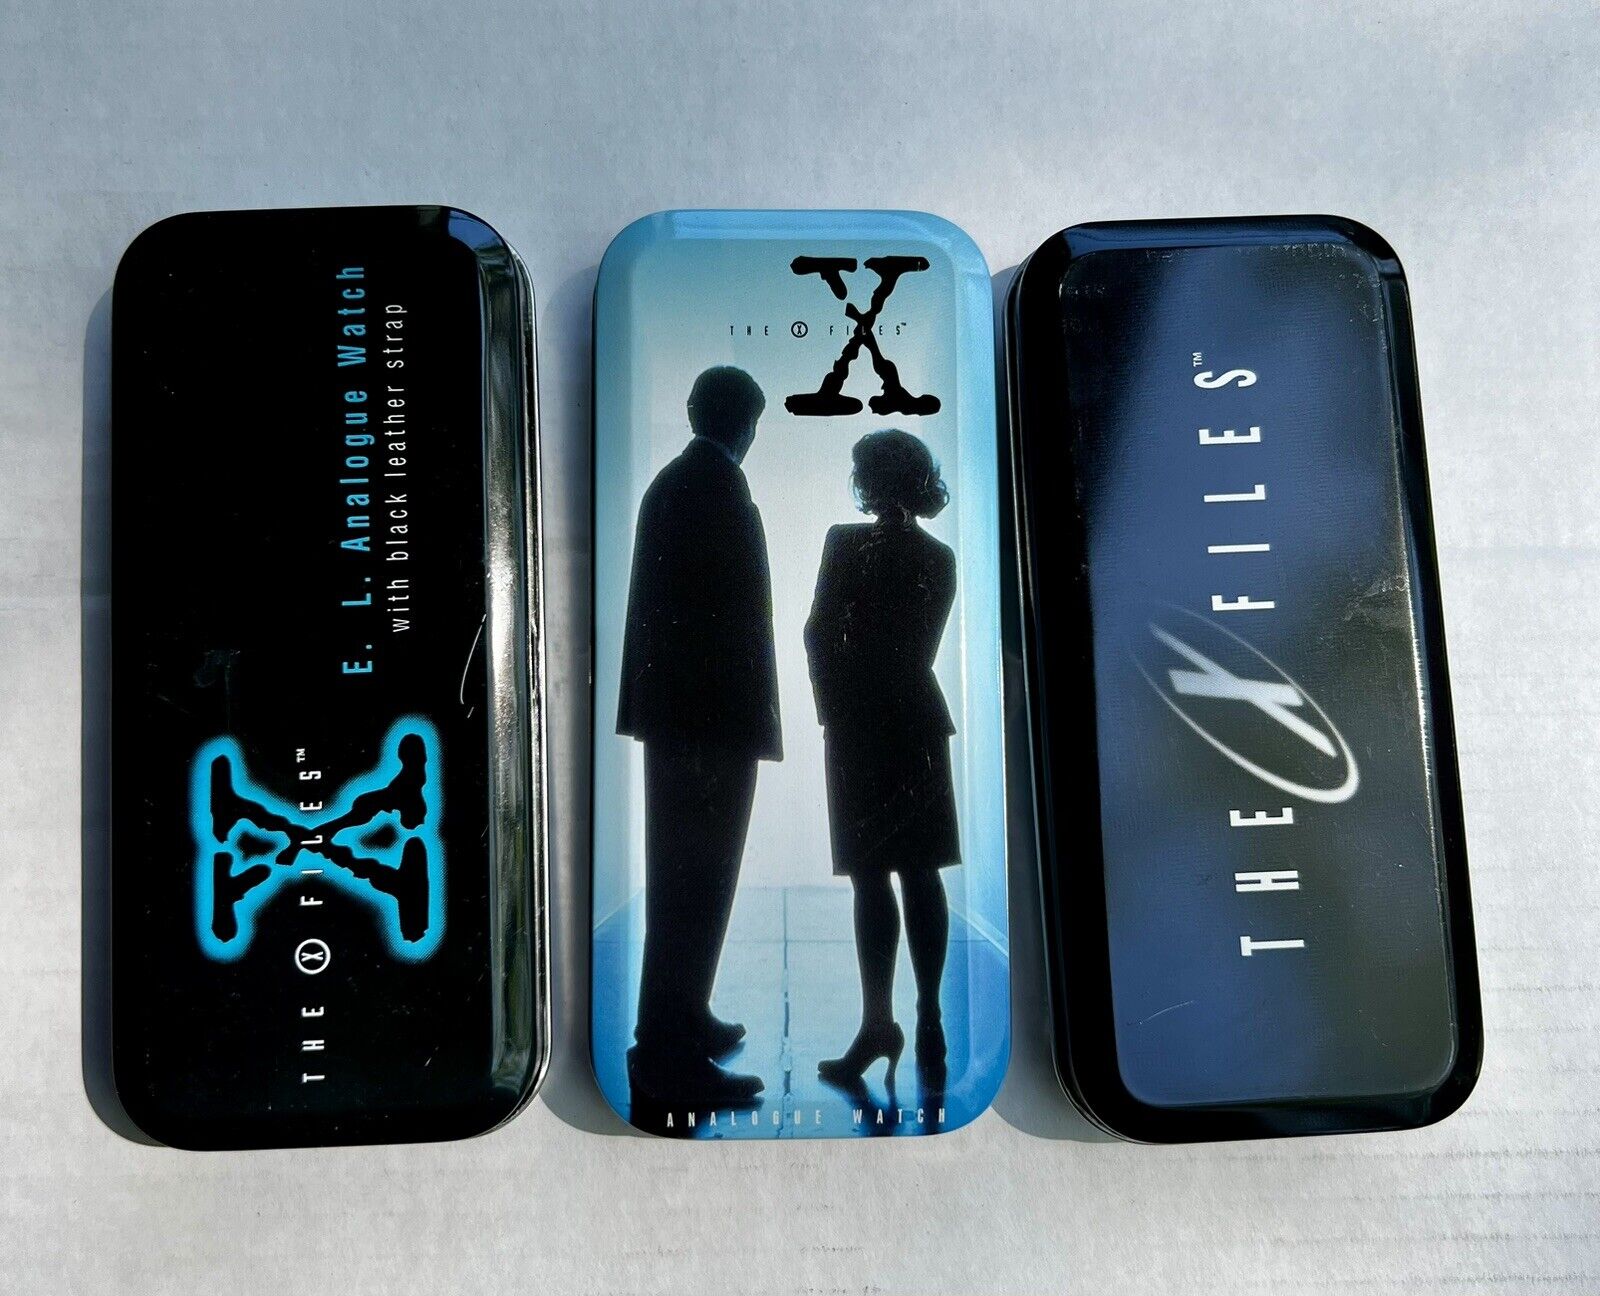 X-Files Set Of 3 Metal Tins With Wrist Watch’s